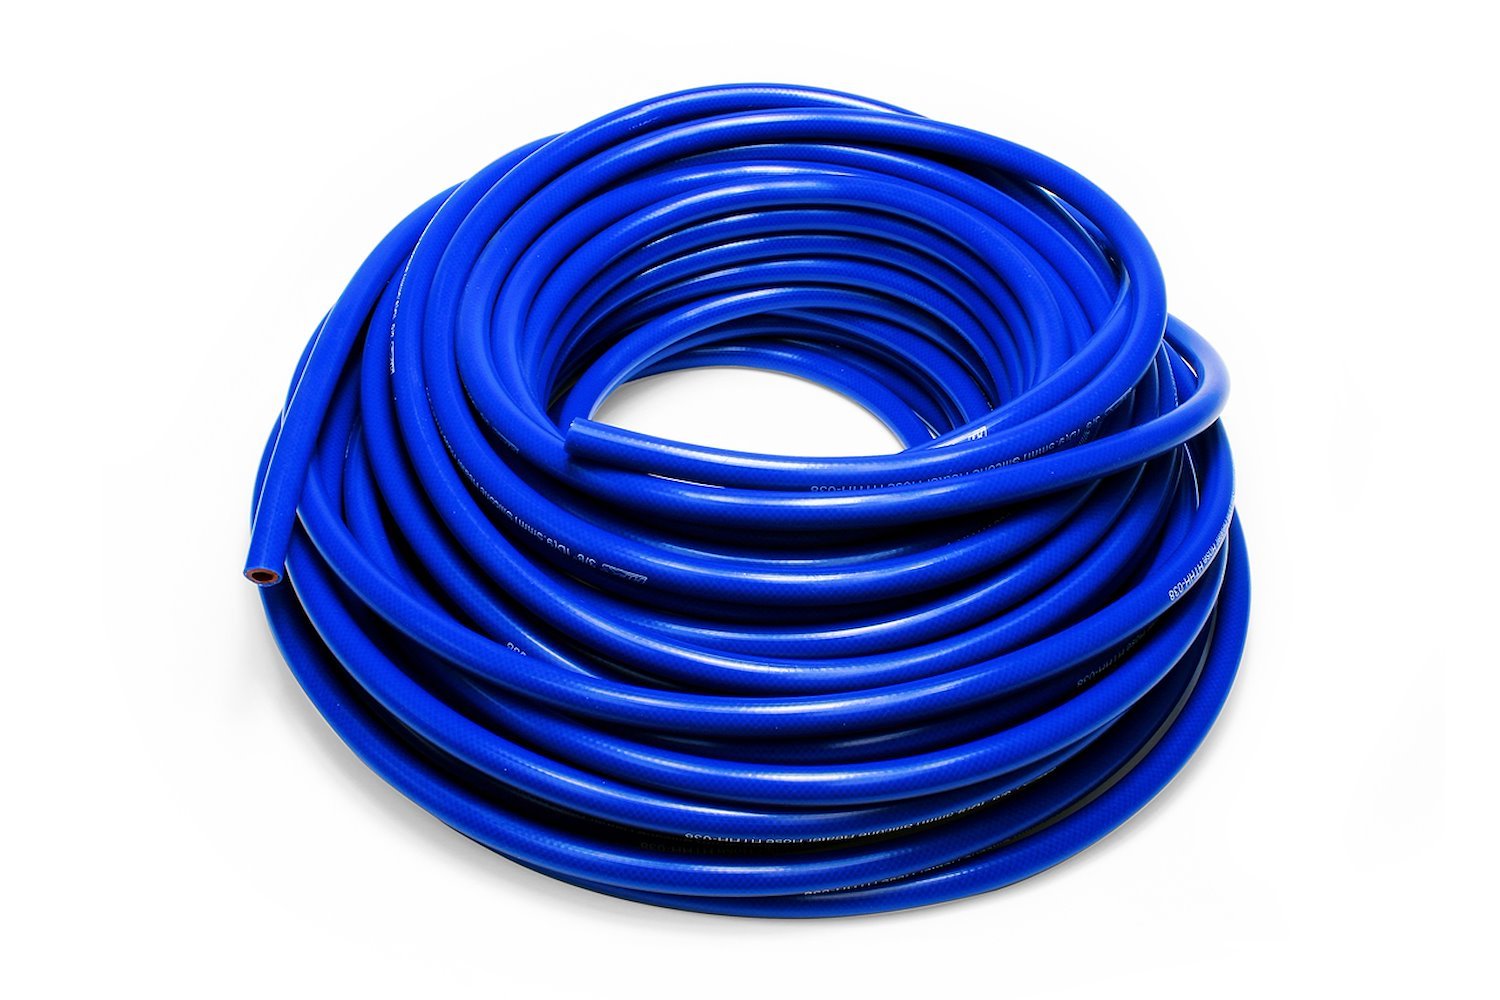 HTHH-075-BLUEx100 Silicone Heater Hose Tubing, High-Temp Reinforced, 3/4 in. ID, 100 ft. Roll, Blue